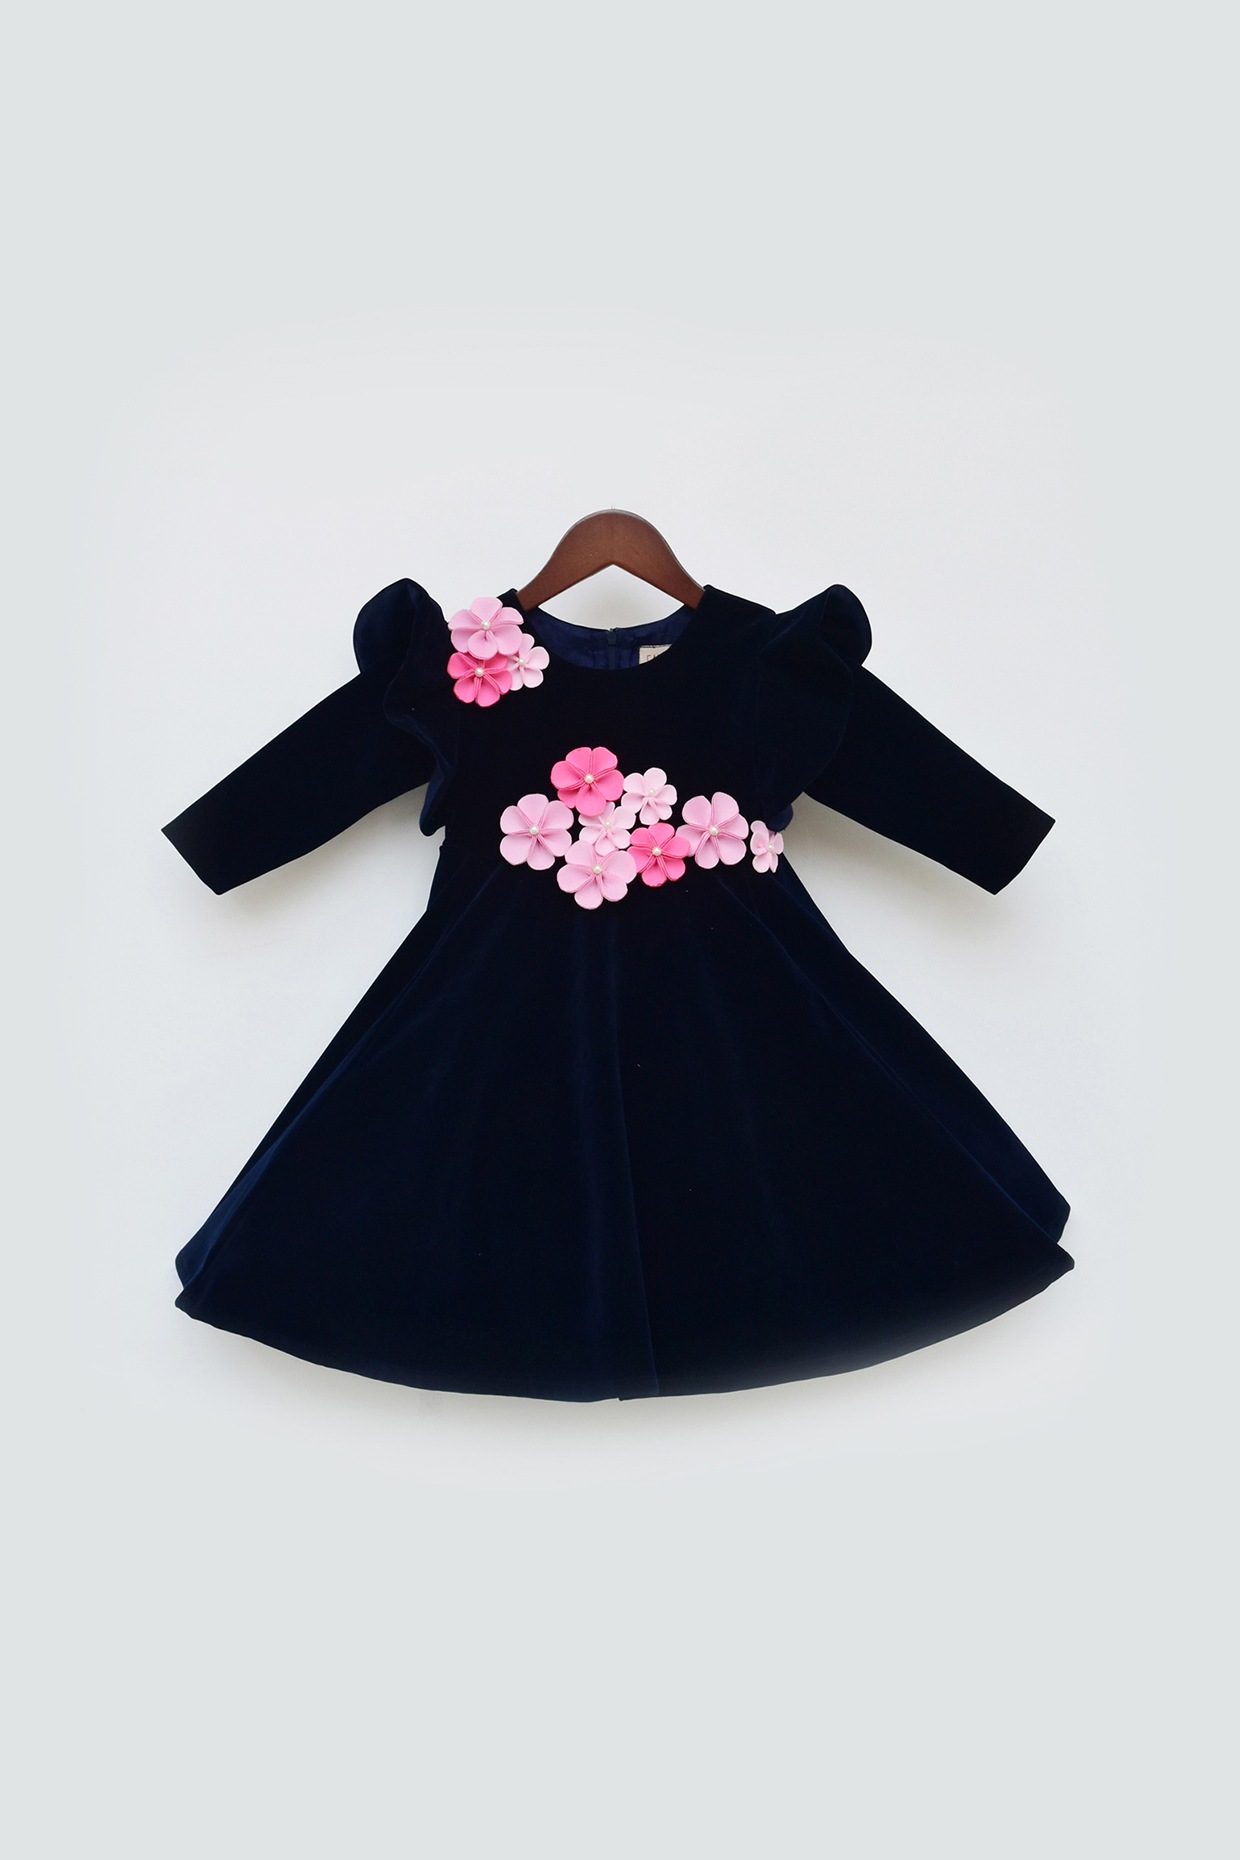 Babypout-Beautiful Kid Girl 2 Piece Velvet Dress - Top Purple Colour with  Blackish Blue Skirt (5-6 Years) : Amazon.in: Clothing & Accessories